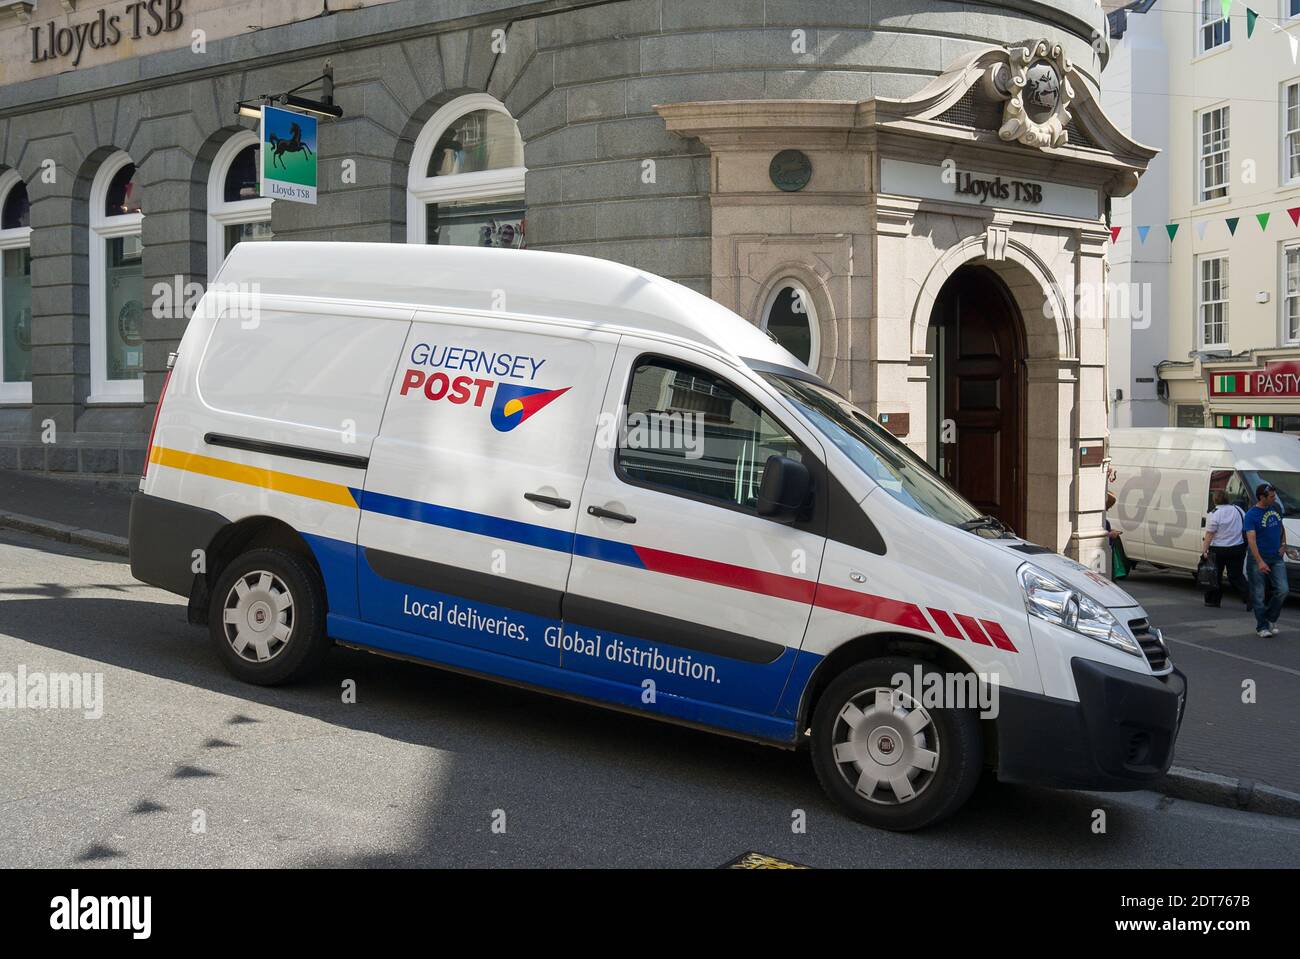 Guernsey Post Fiat van parked on a steep hill in St Peter Port Guernsey UK Stock Photo